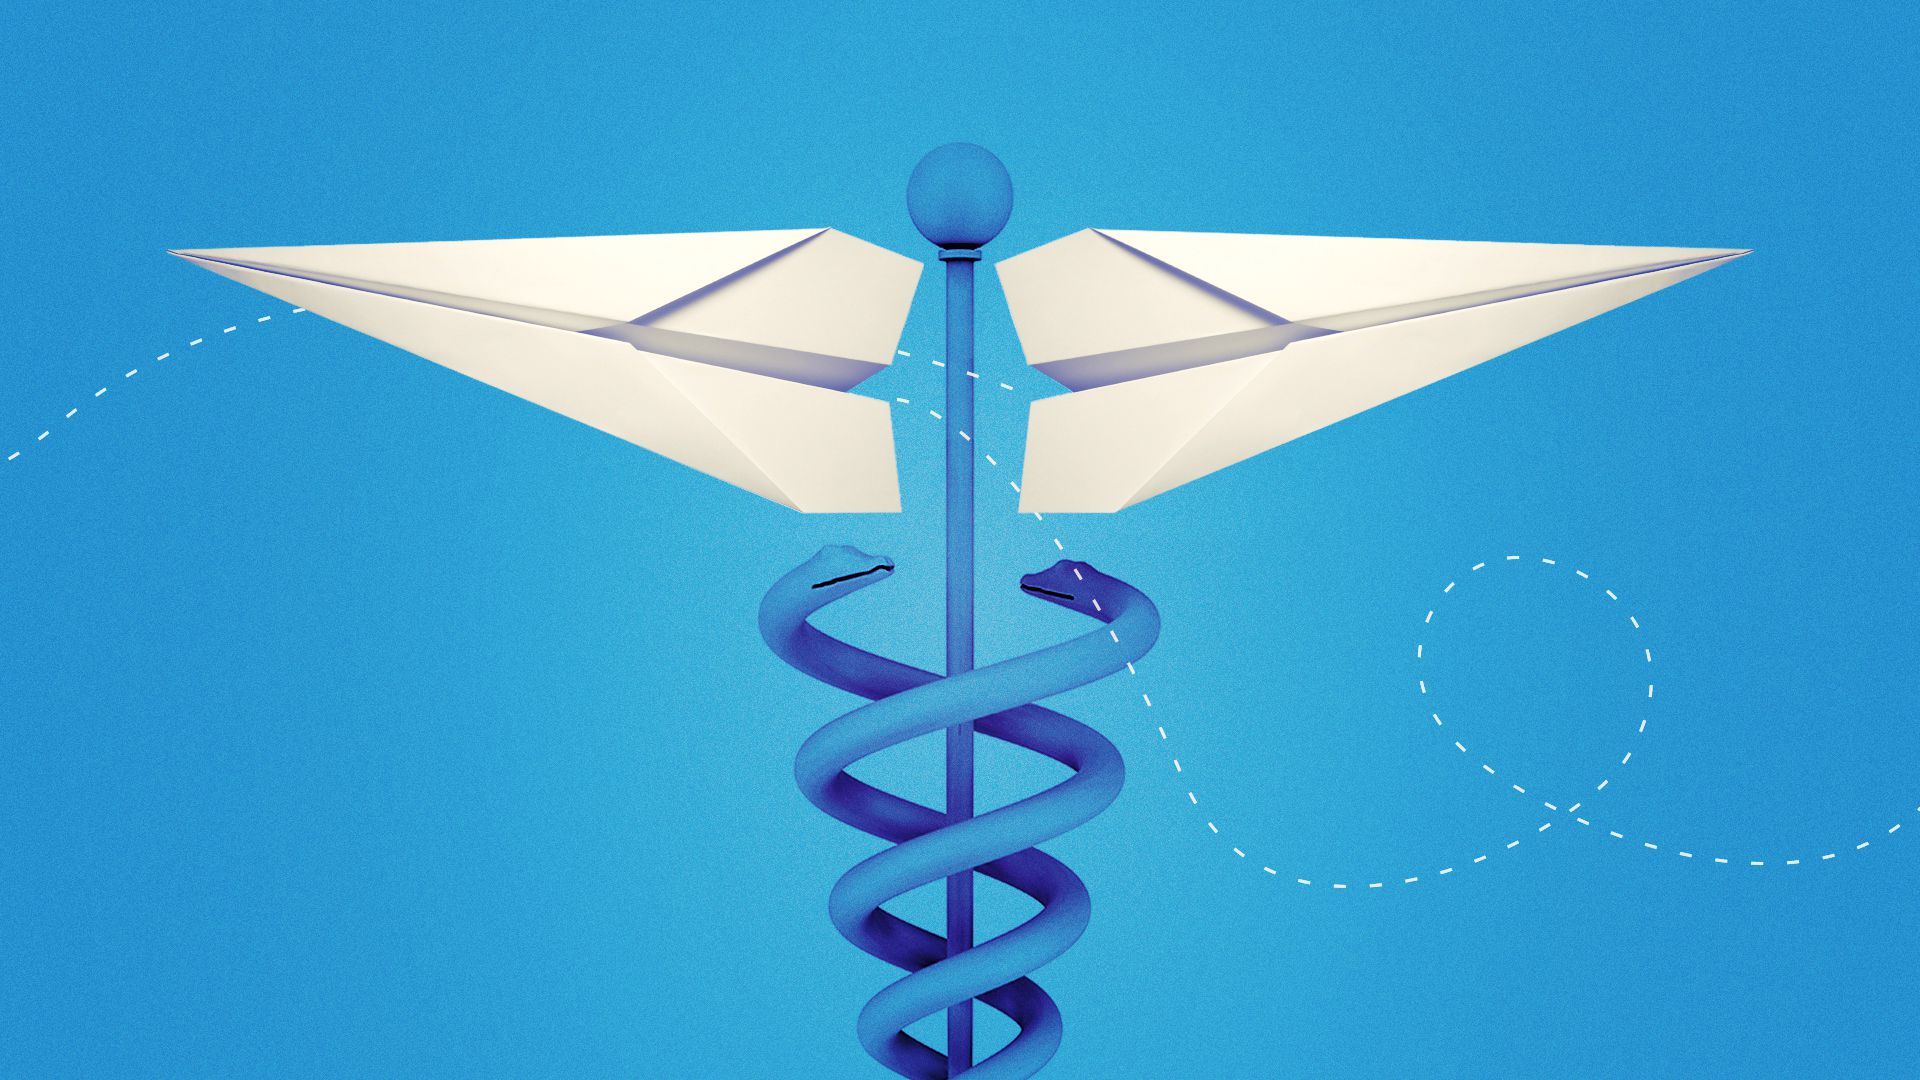 Illustration of a caduceus with paper airplanes instead of wings.